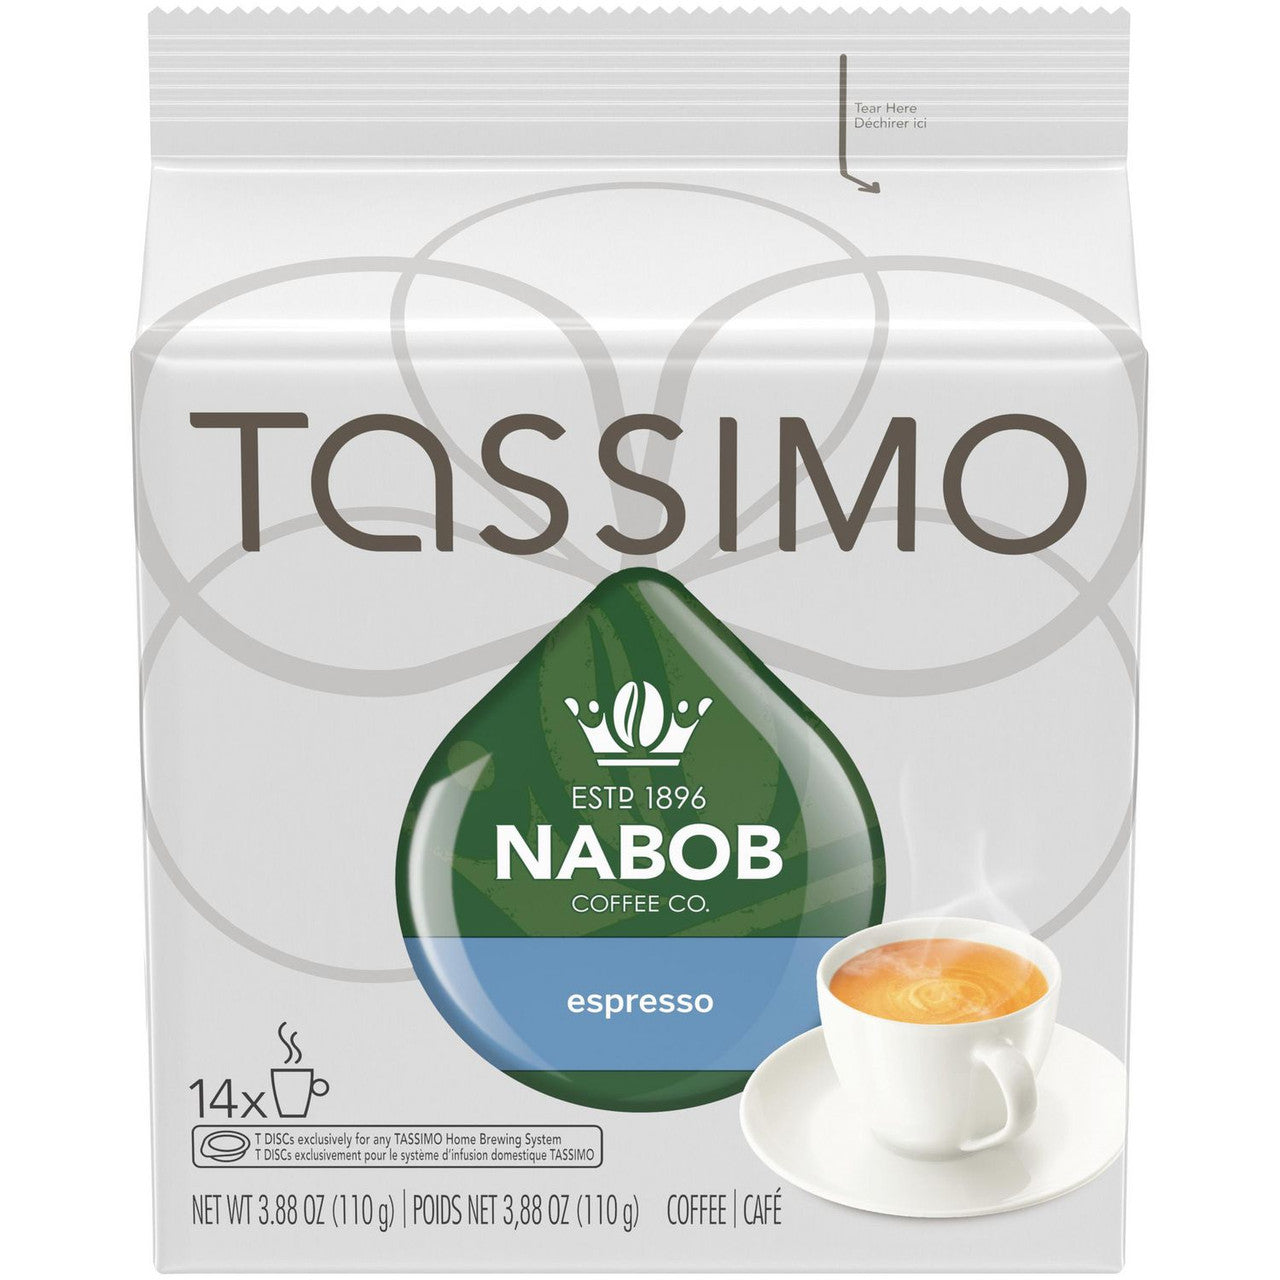 Tassimo Nabob Coffee Espresso, 70 T-Discs (5 Boxes of 14 T-Discs) {Imported from Canada}